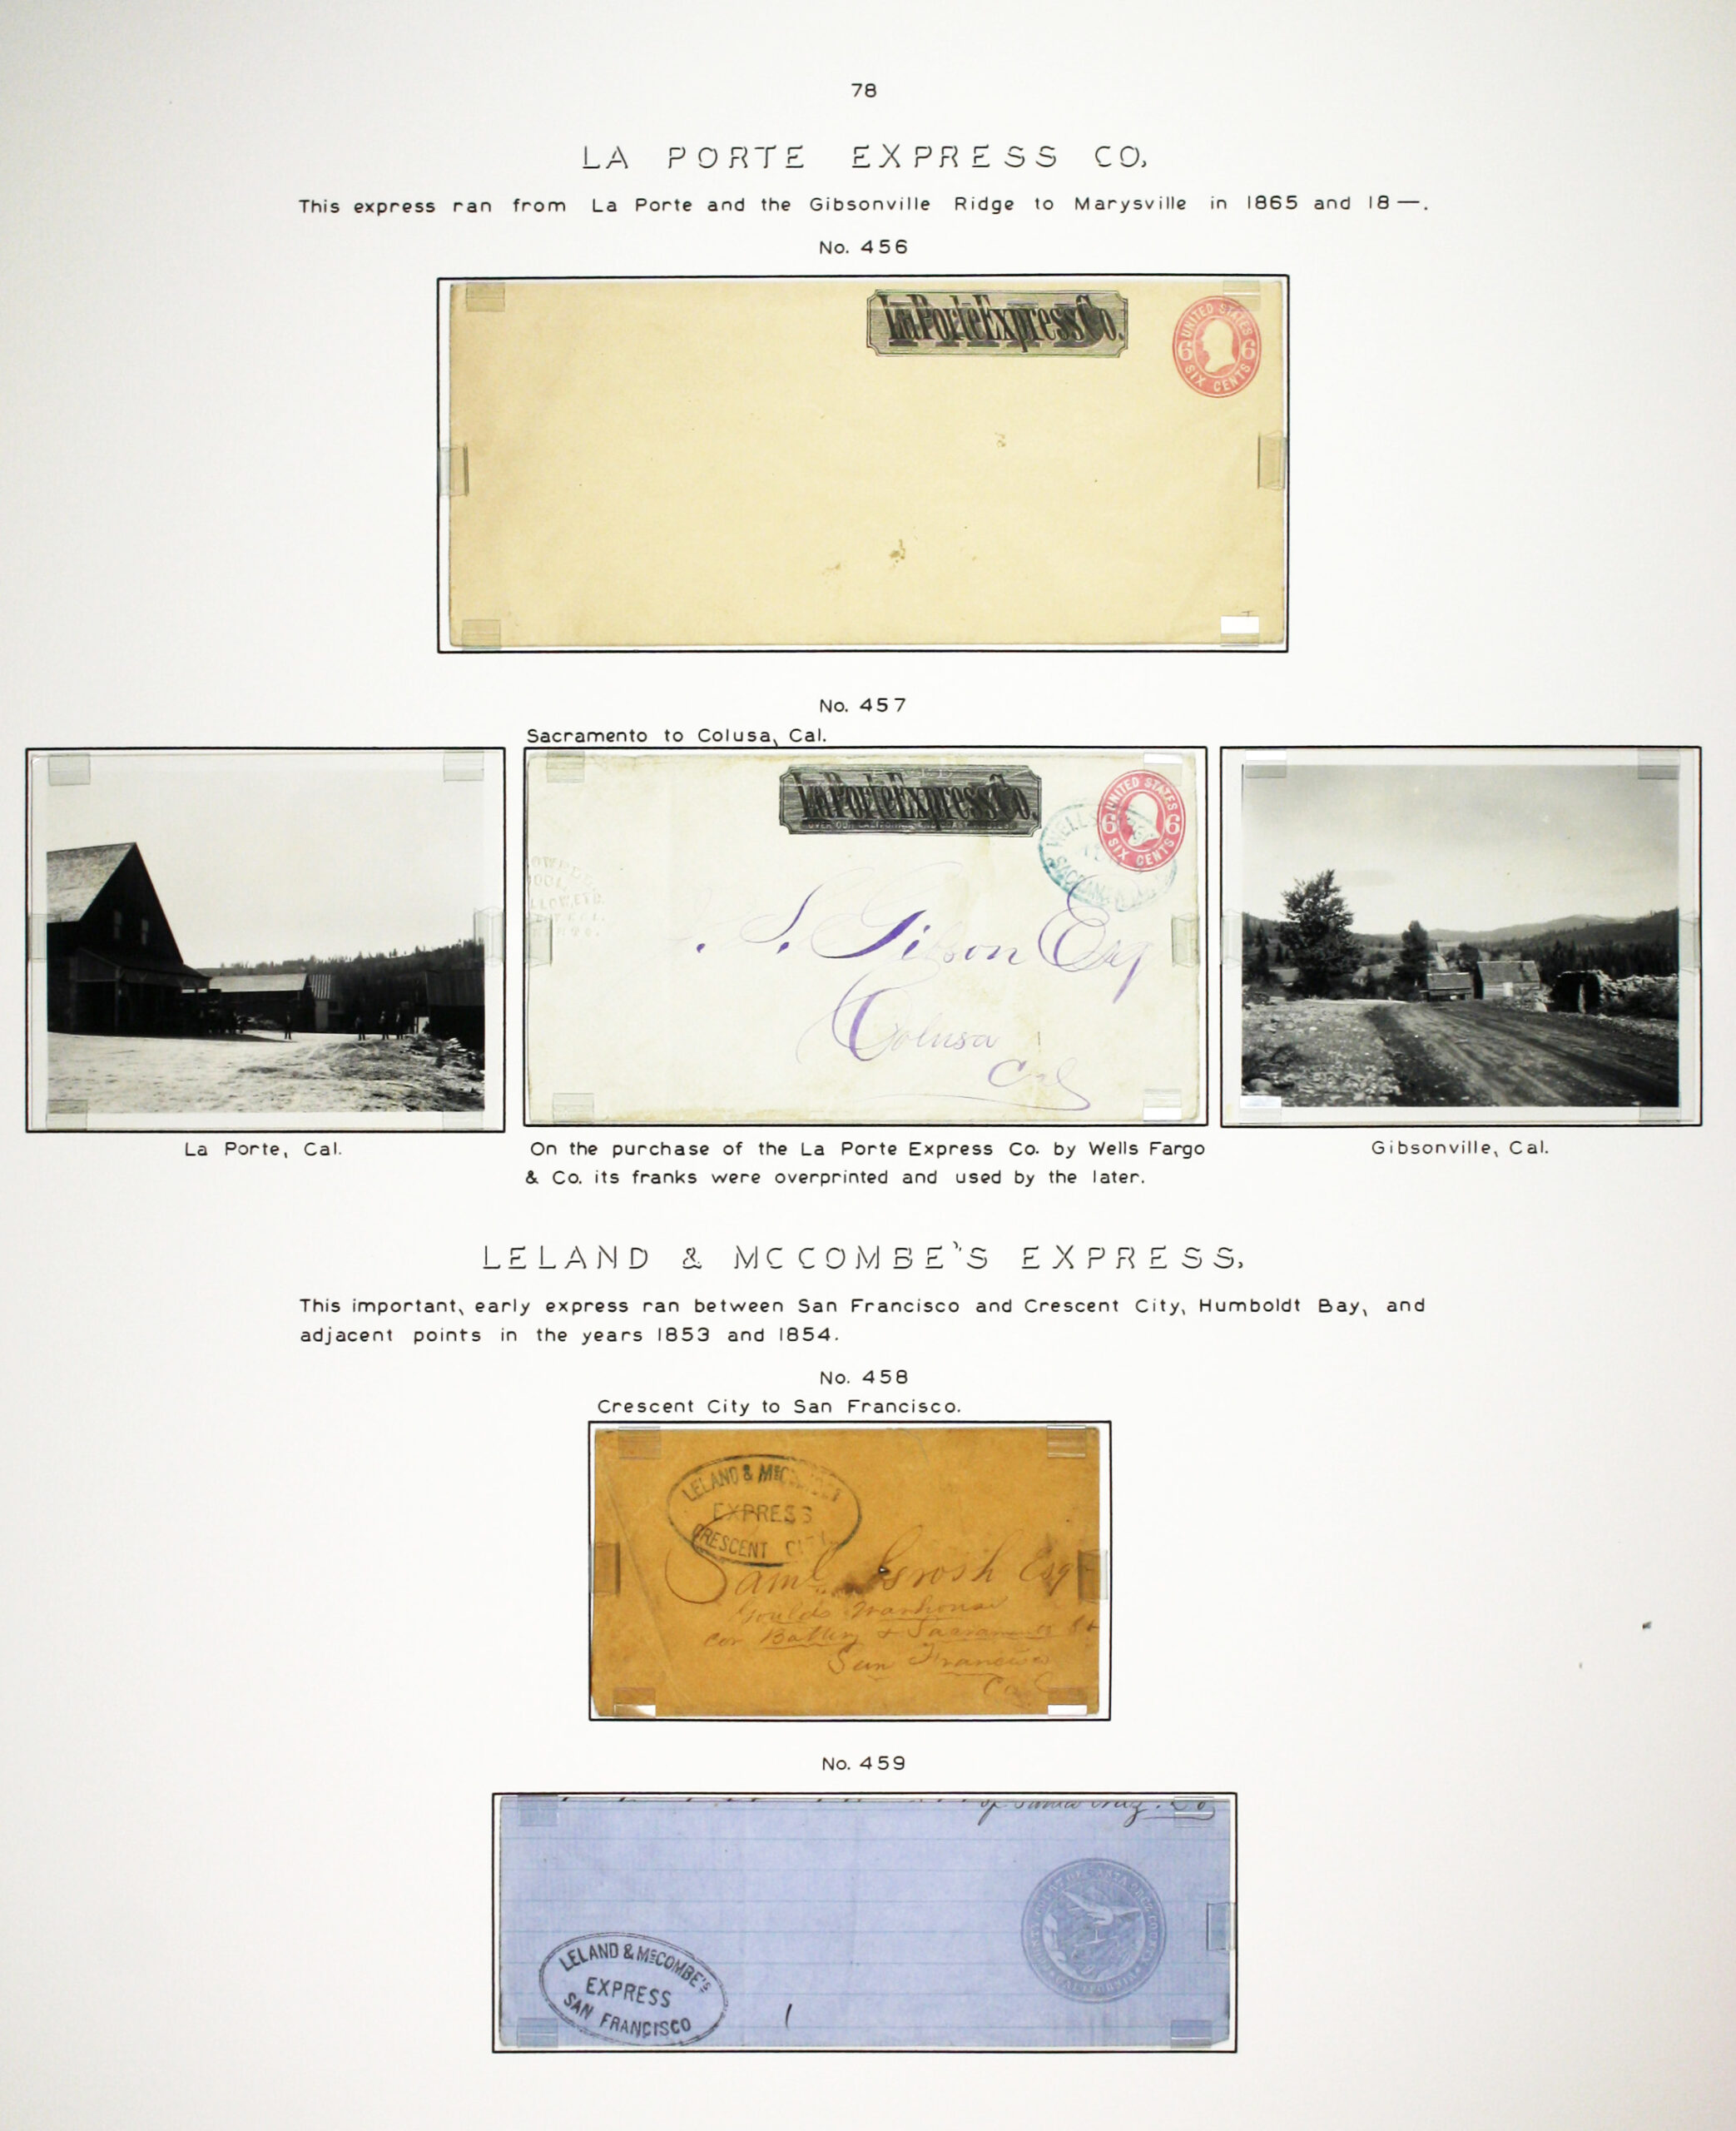 Historic exhibit Panel #78 featuring letter covers, an account statement and two photographs. Long descriptions are available as page content. Image link will enlarge image.